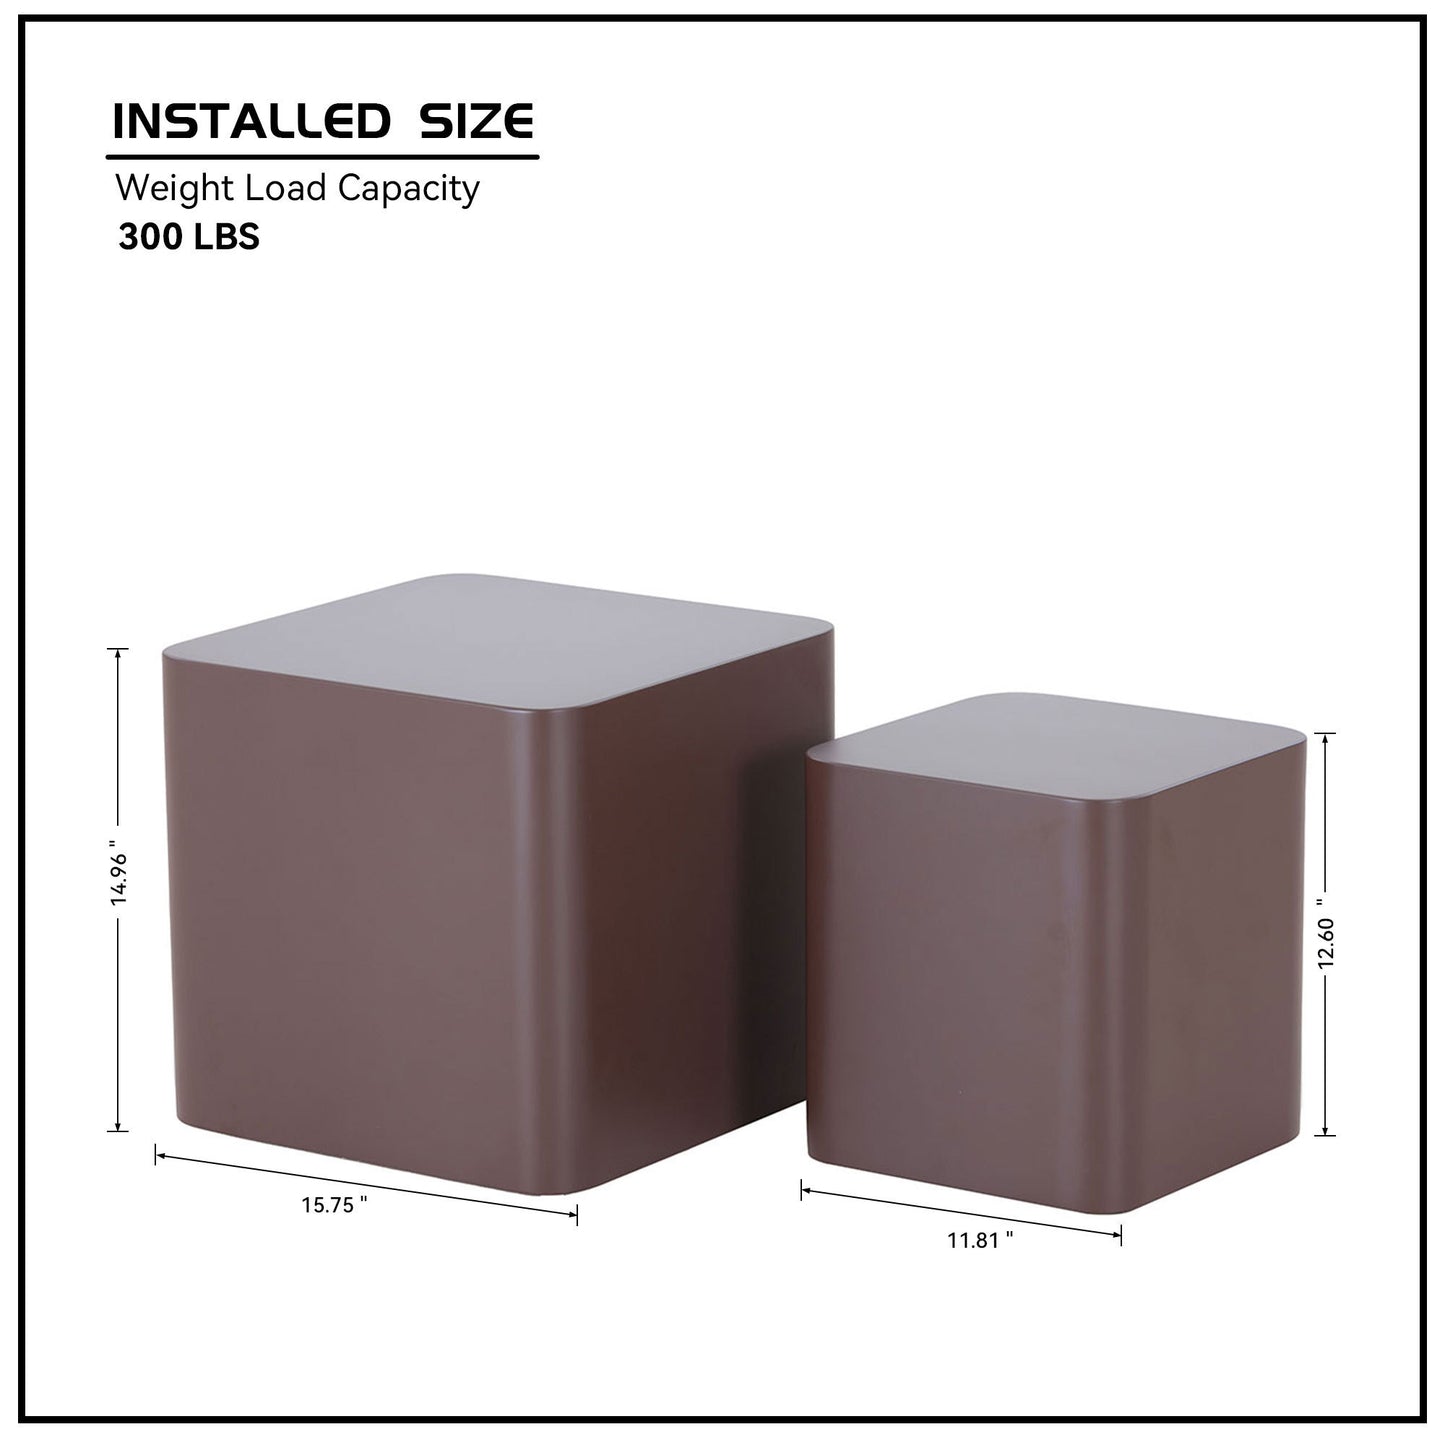 MDF Nesting Table Set of 2 - Chocolate Brown, Modern Design, Space-saving Furniture, Durable Material, Stylish Home Decor